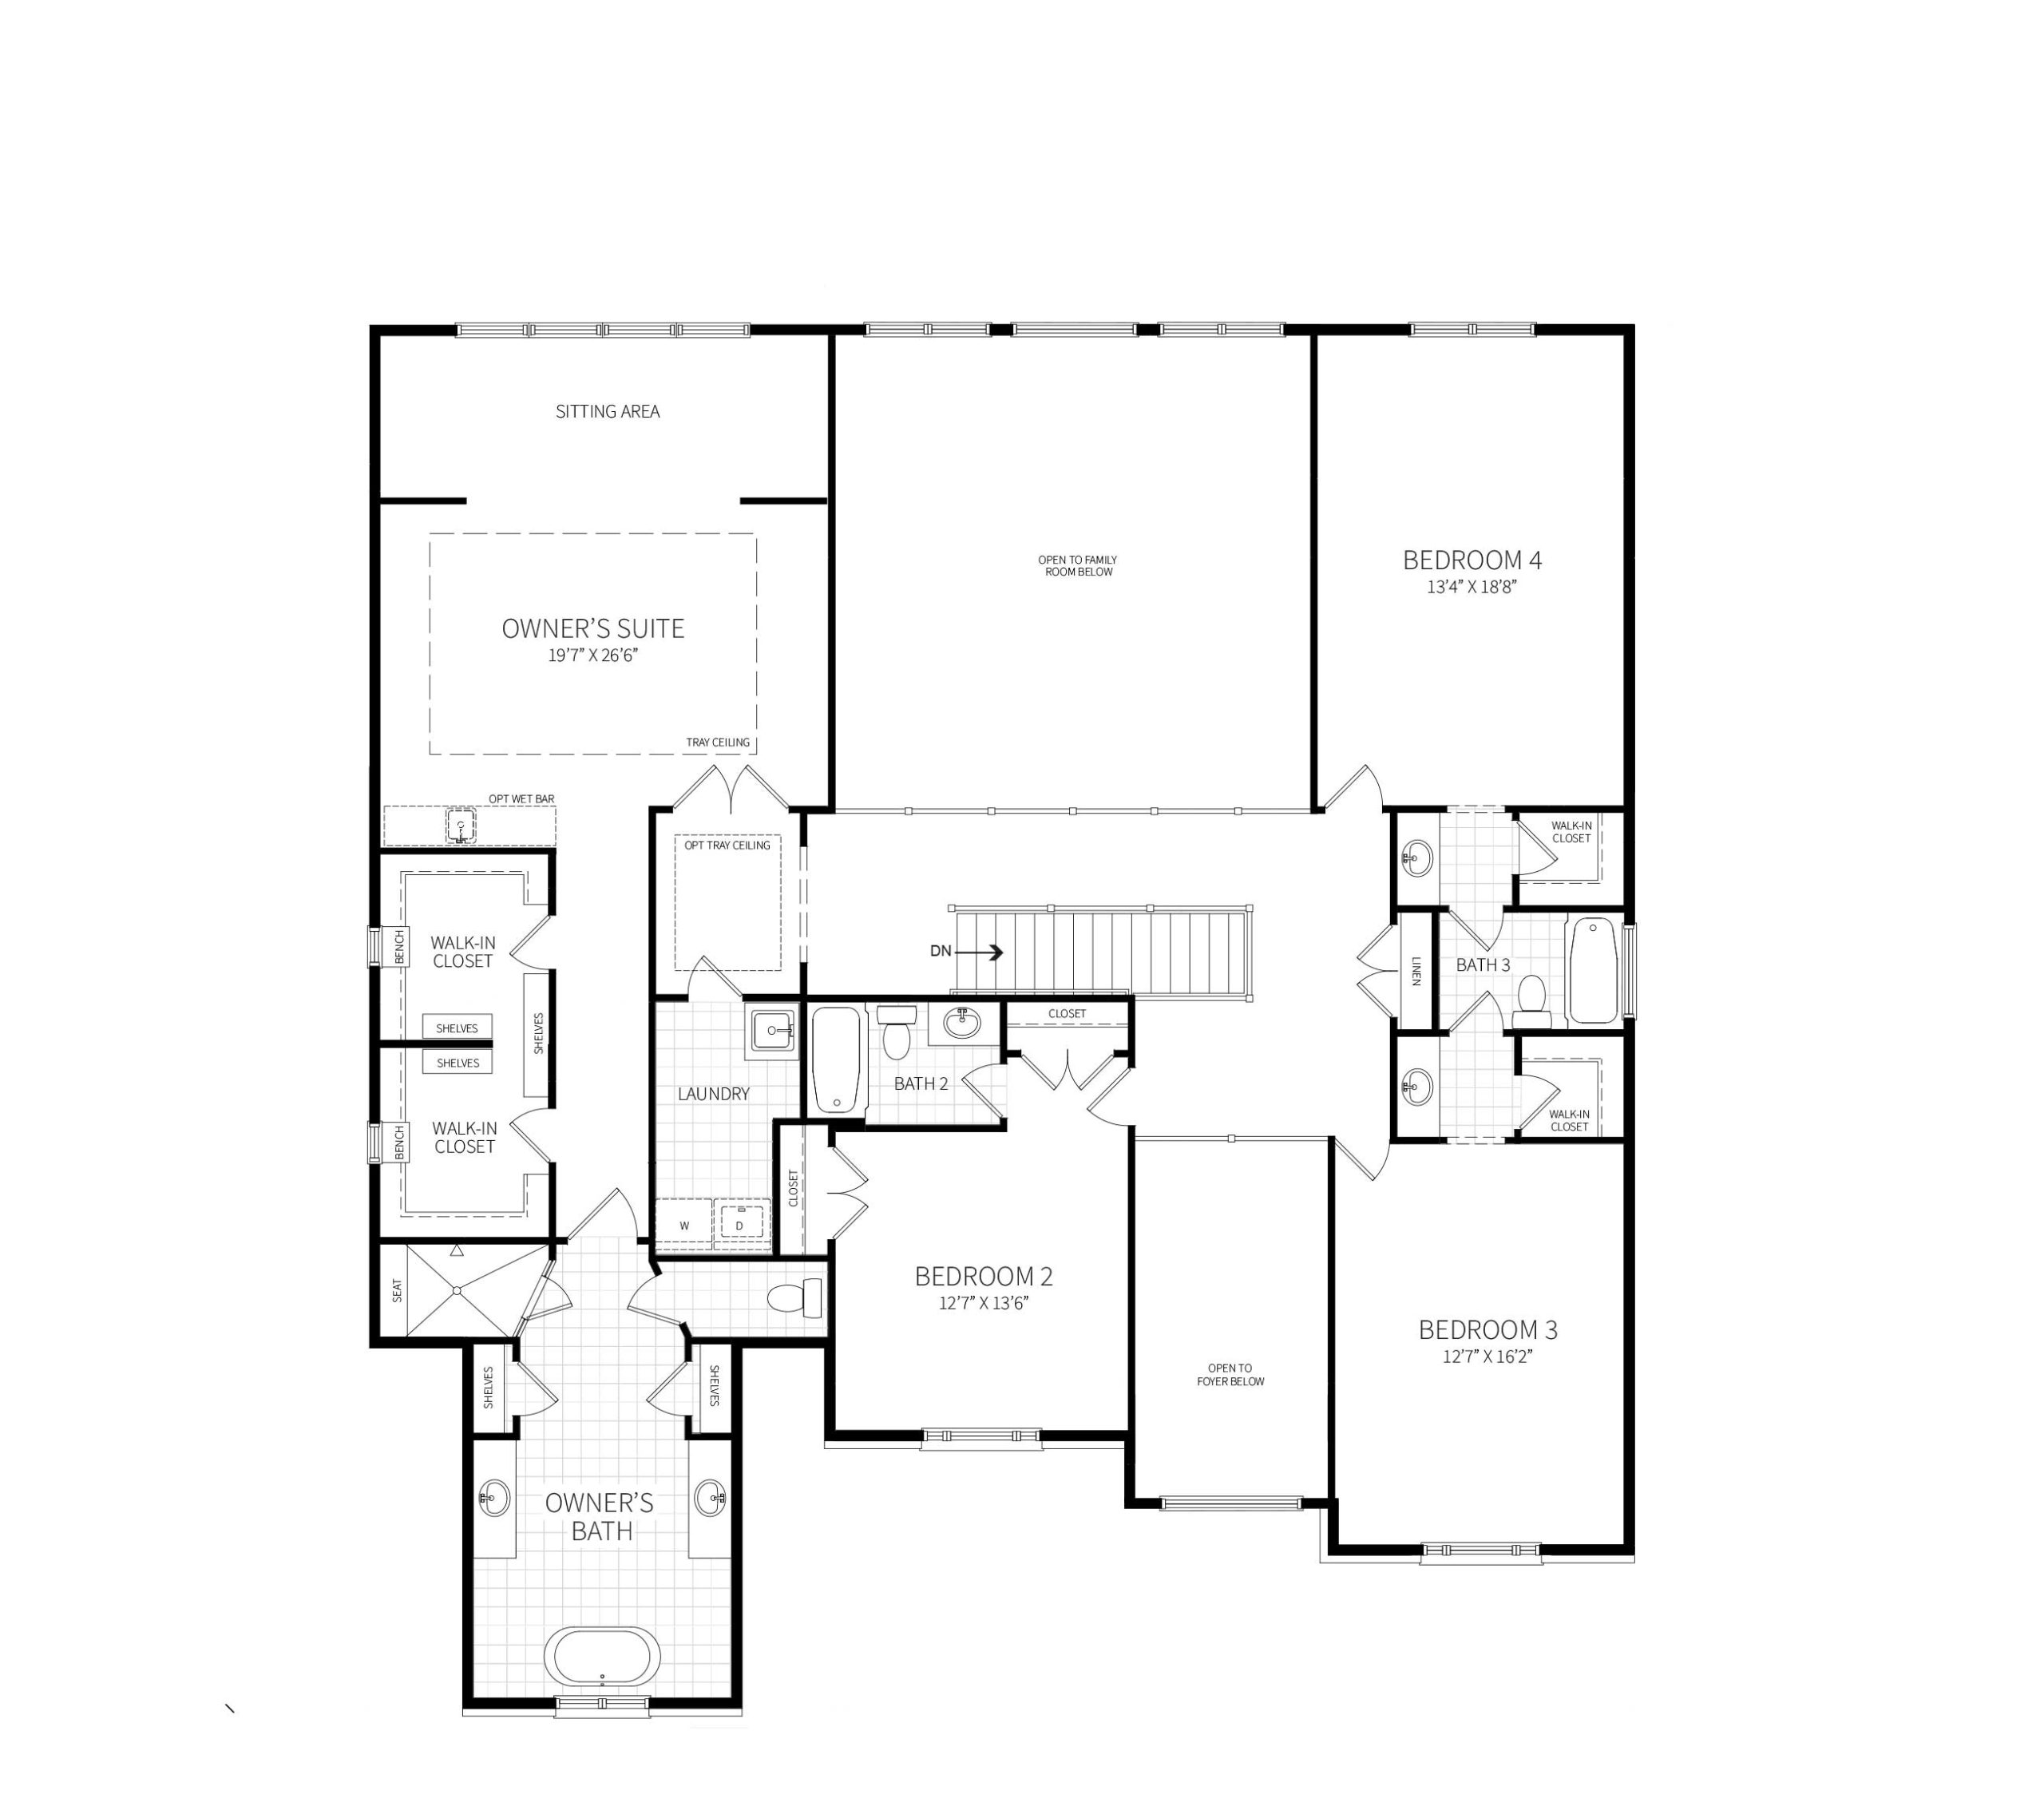 The second floor plan for the home proposed for 10301 South Glen Rd, Potomac, MD